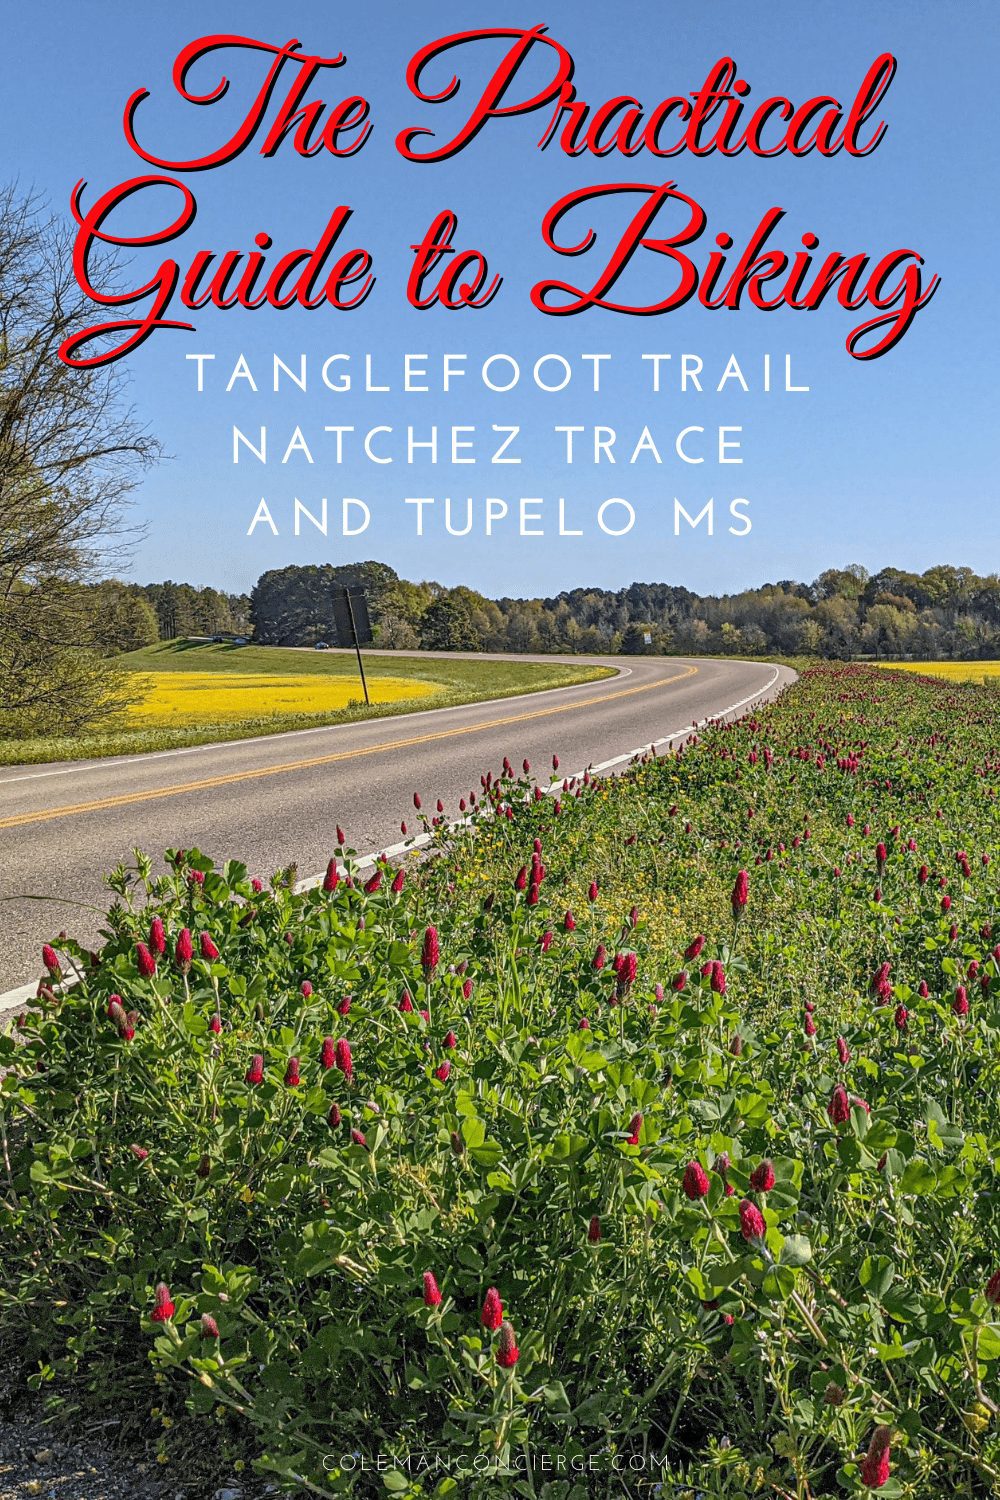 The Natchez Trace road and wildflowers